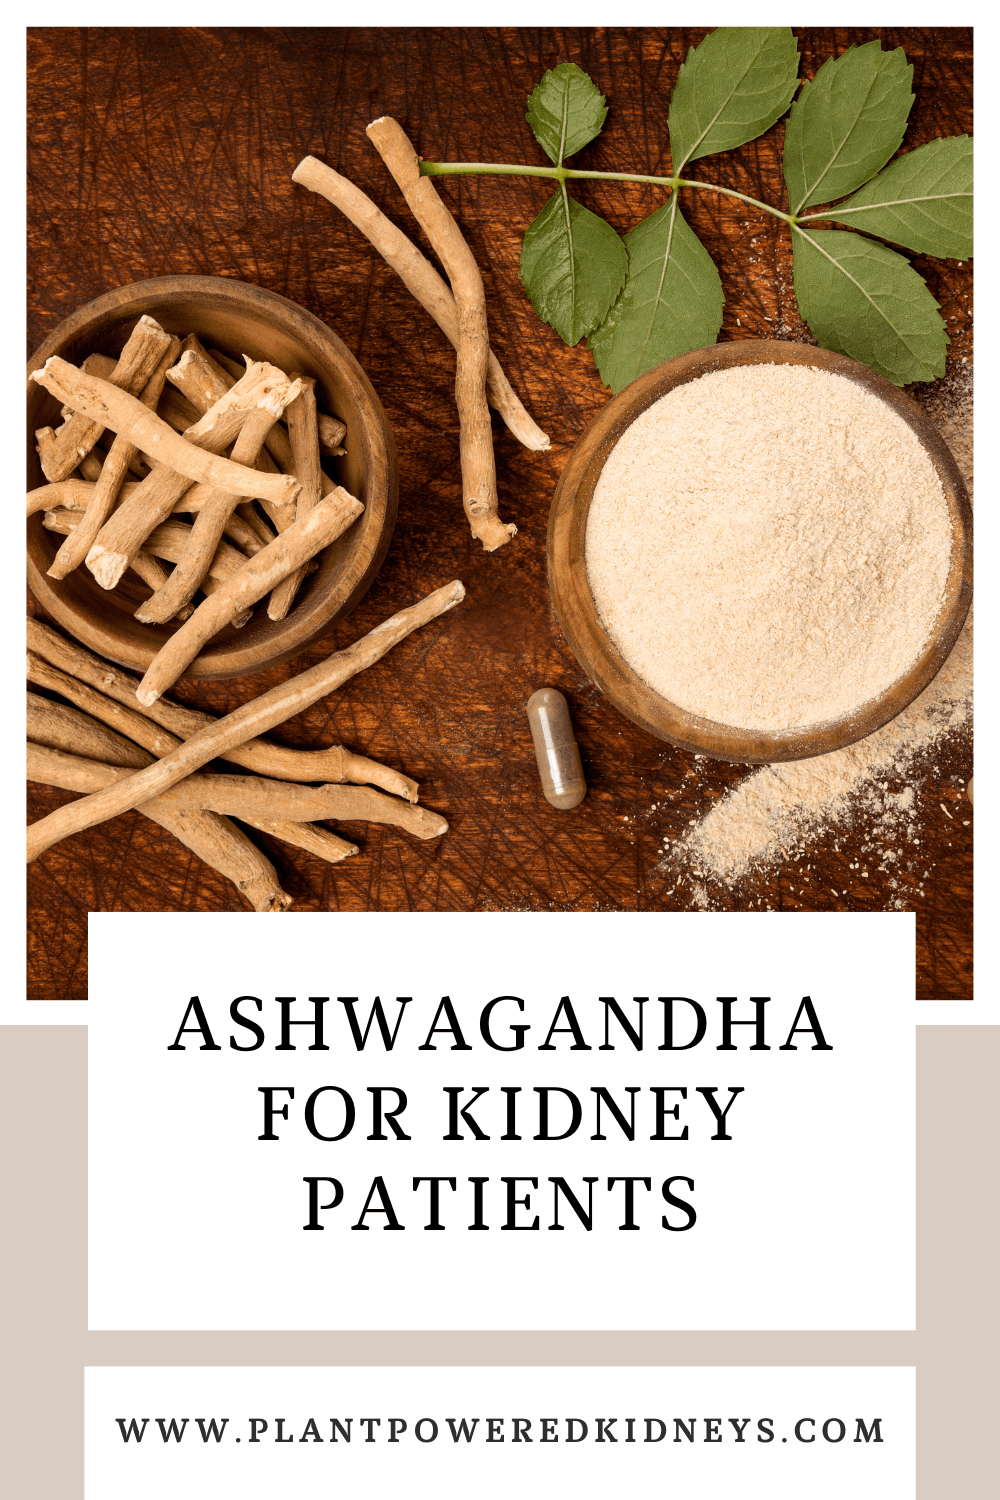 Ashwagandha for kidney patients